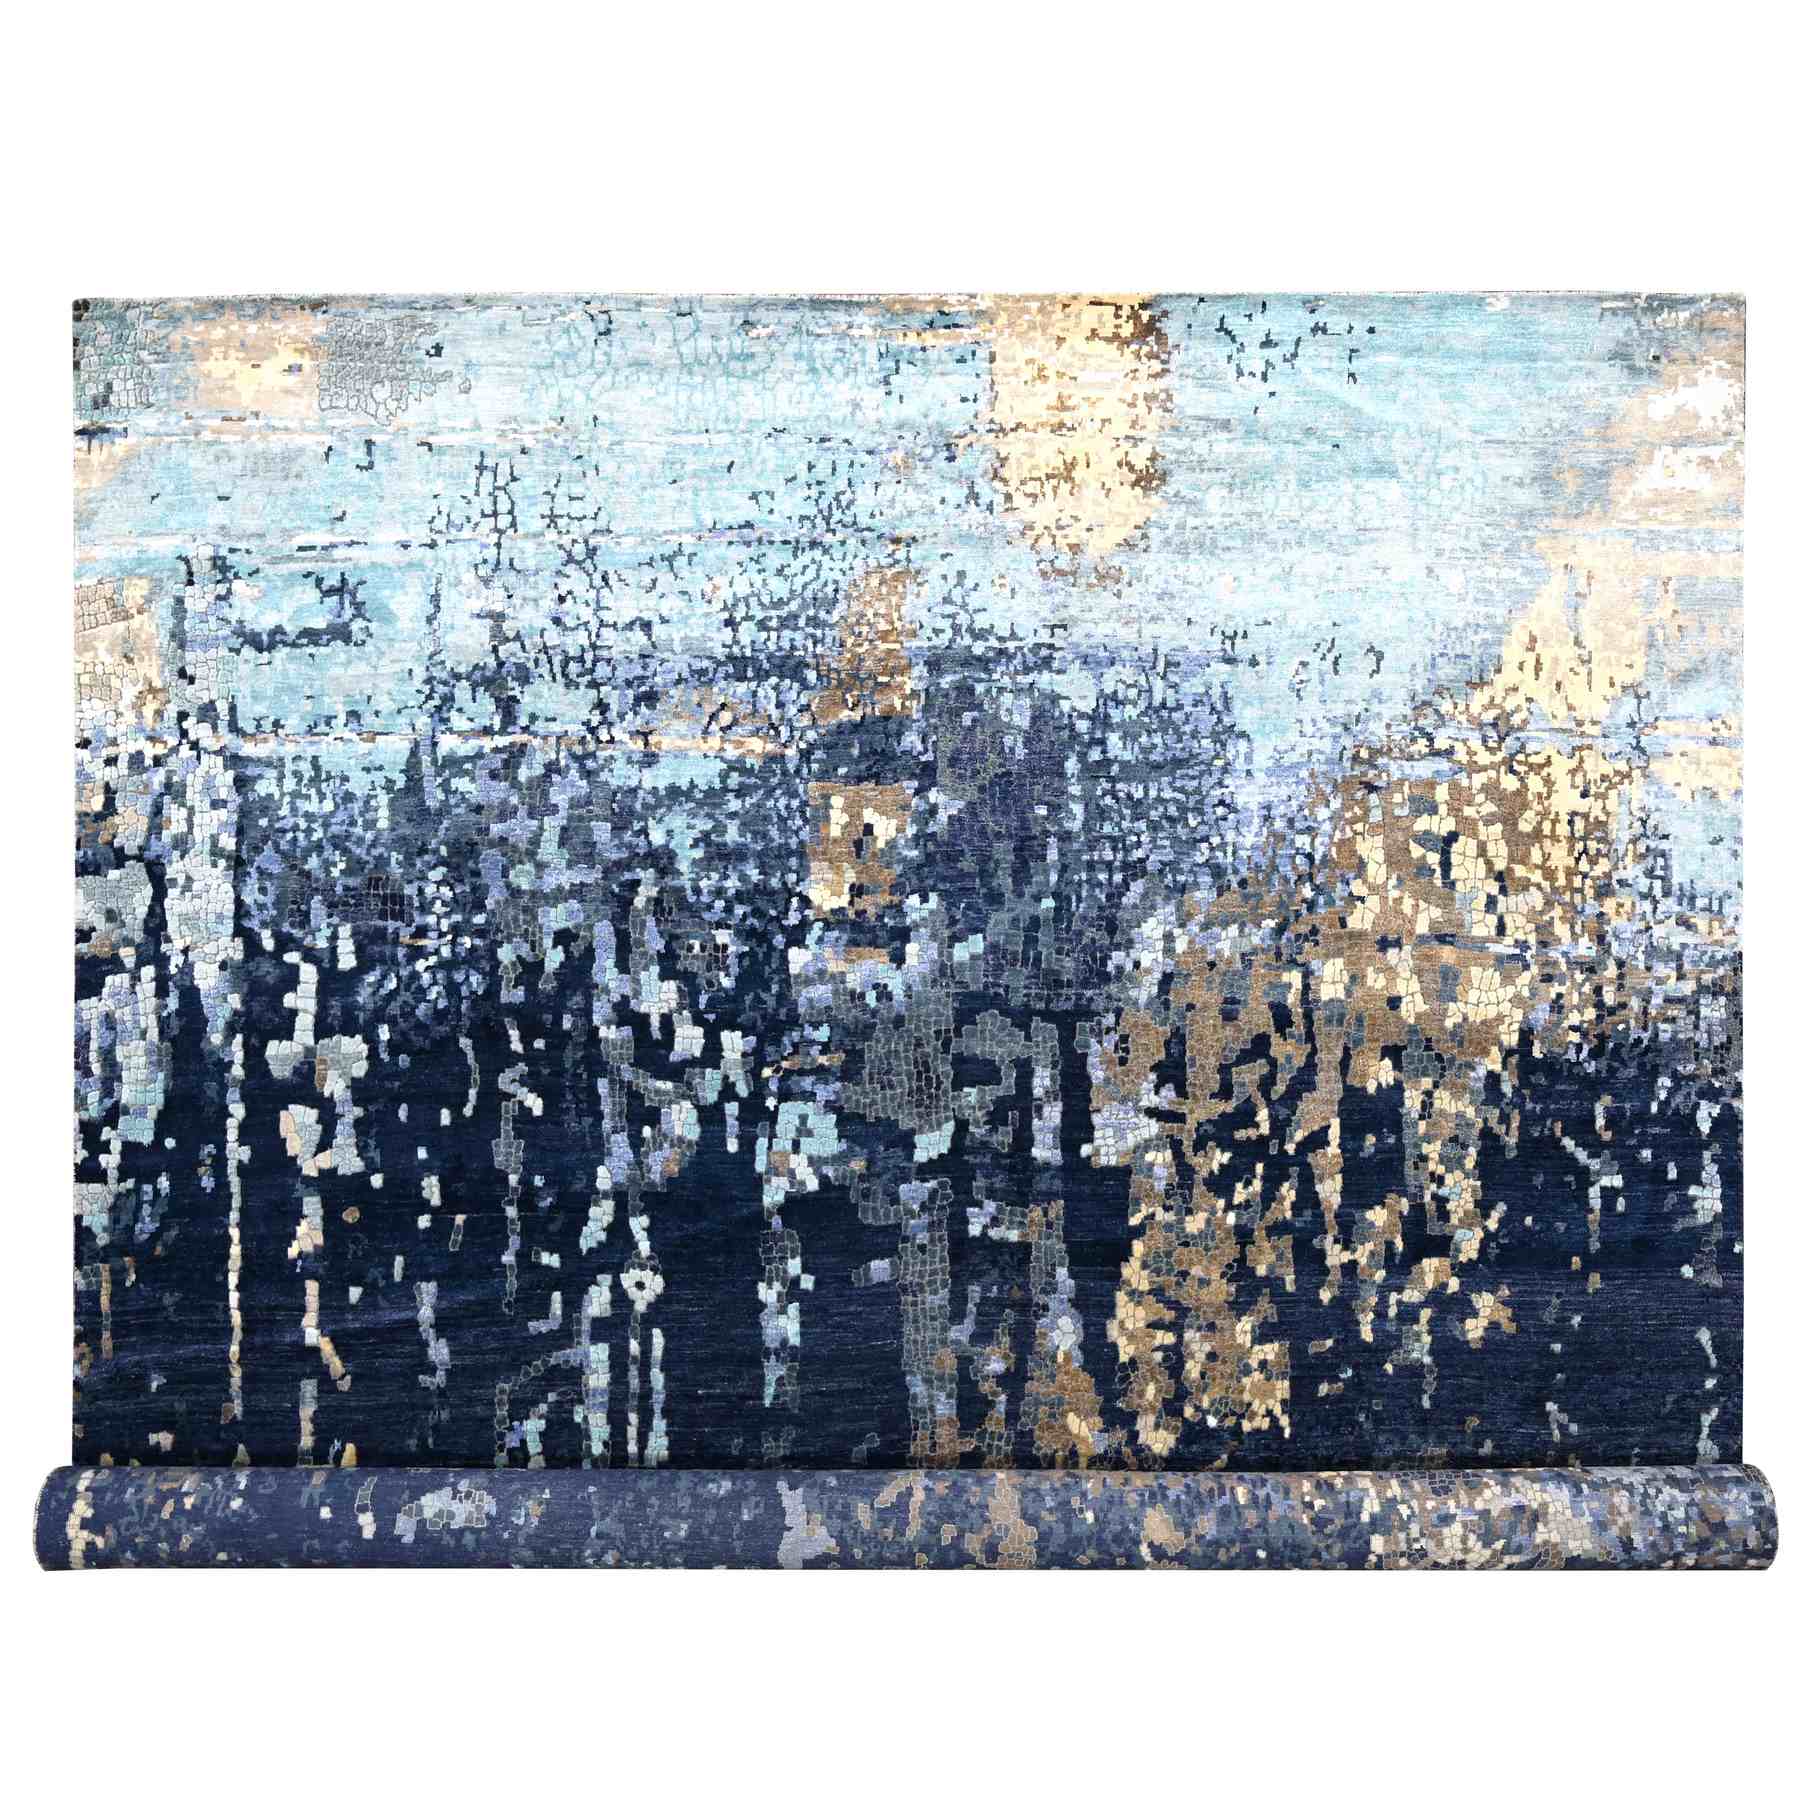 Modern-and-Contemporary-Hand-Knotted-Rug-423975